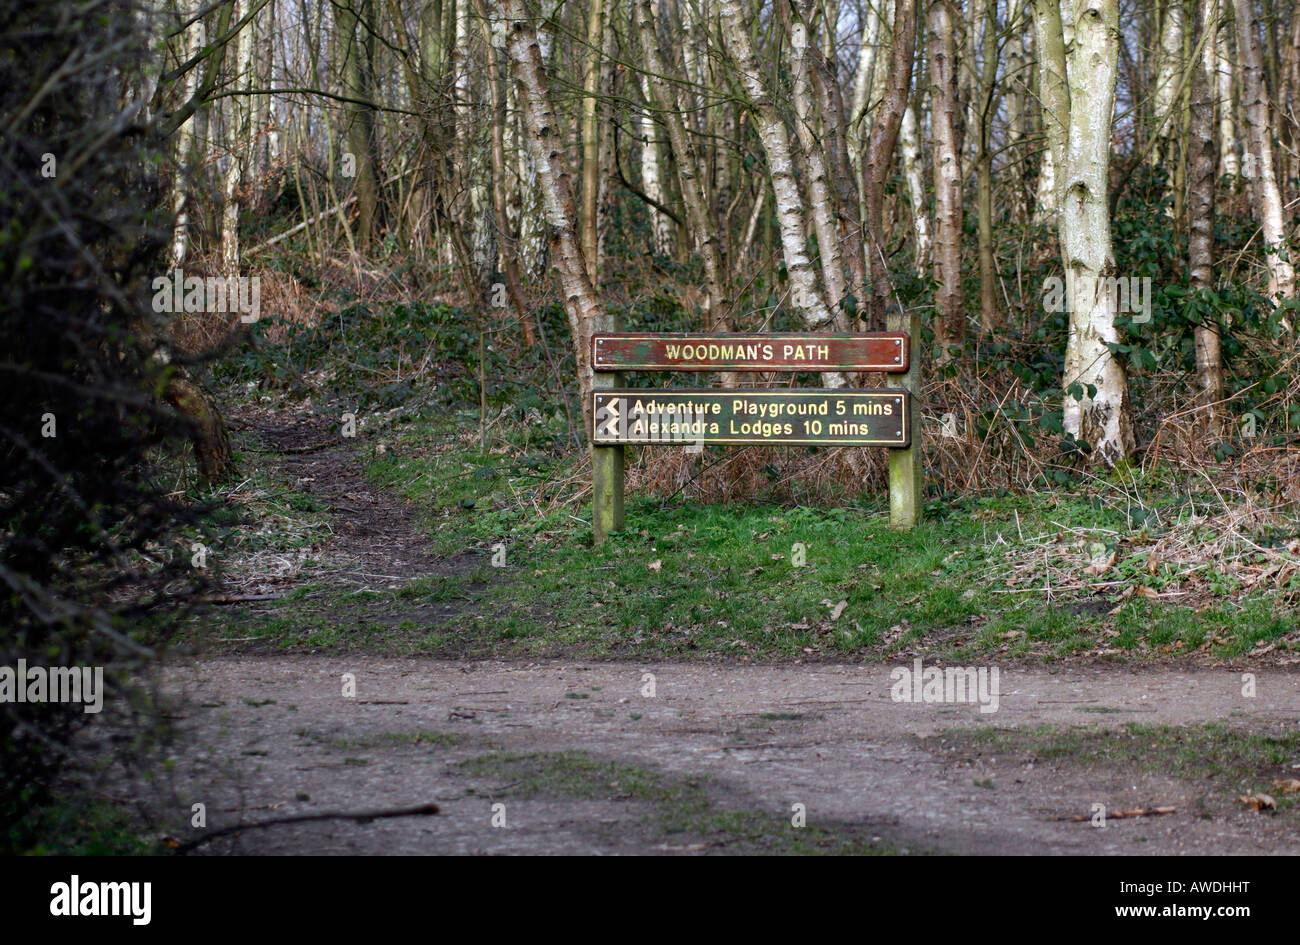 Woodmans Path Signpost indicating the direction and time to walk to many of the facilities and features seen in Bestwood Country Park a community area based on the remnants of the old Bestwood Colliery at one time reputed to be the largest in the UK which closed in 1967. Bestwood Country Park Nottingham, UK Stock Photo